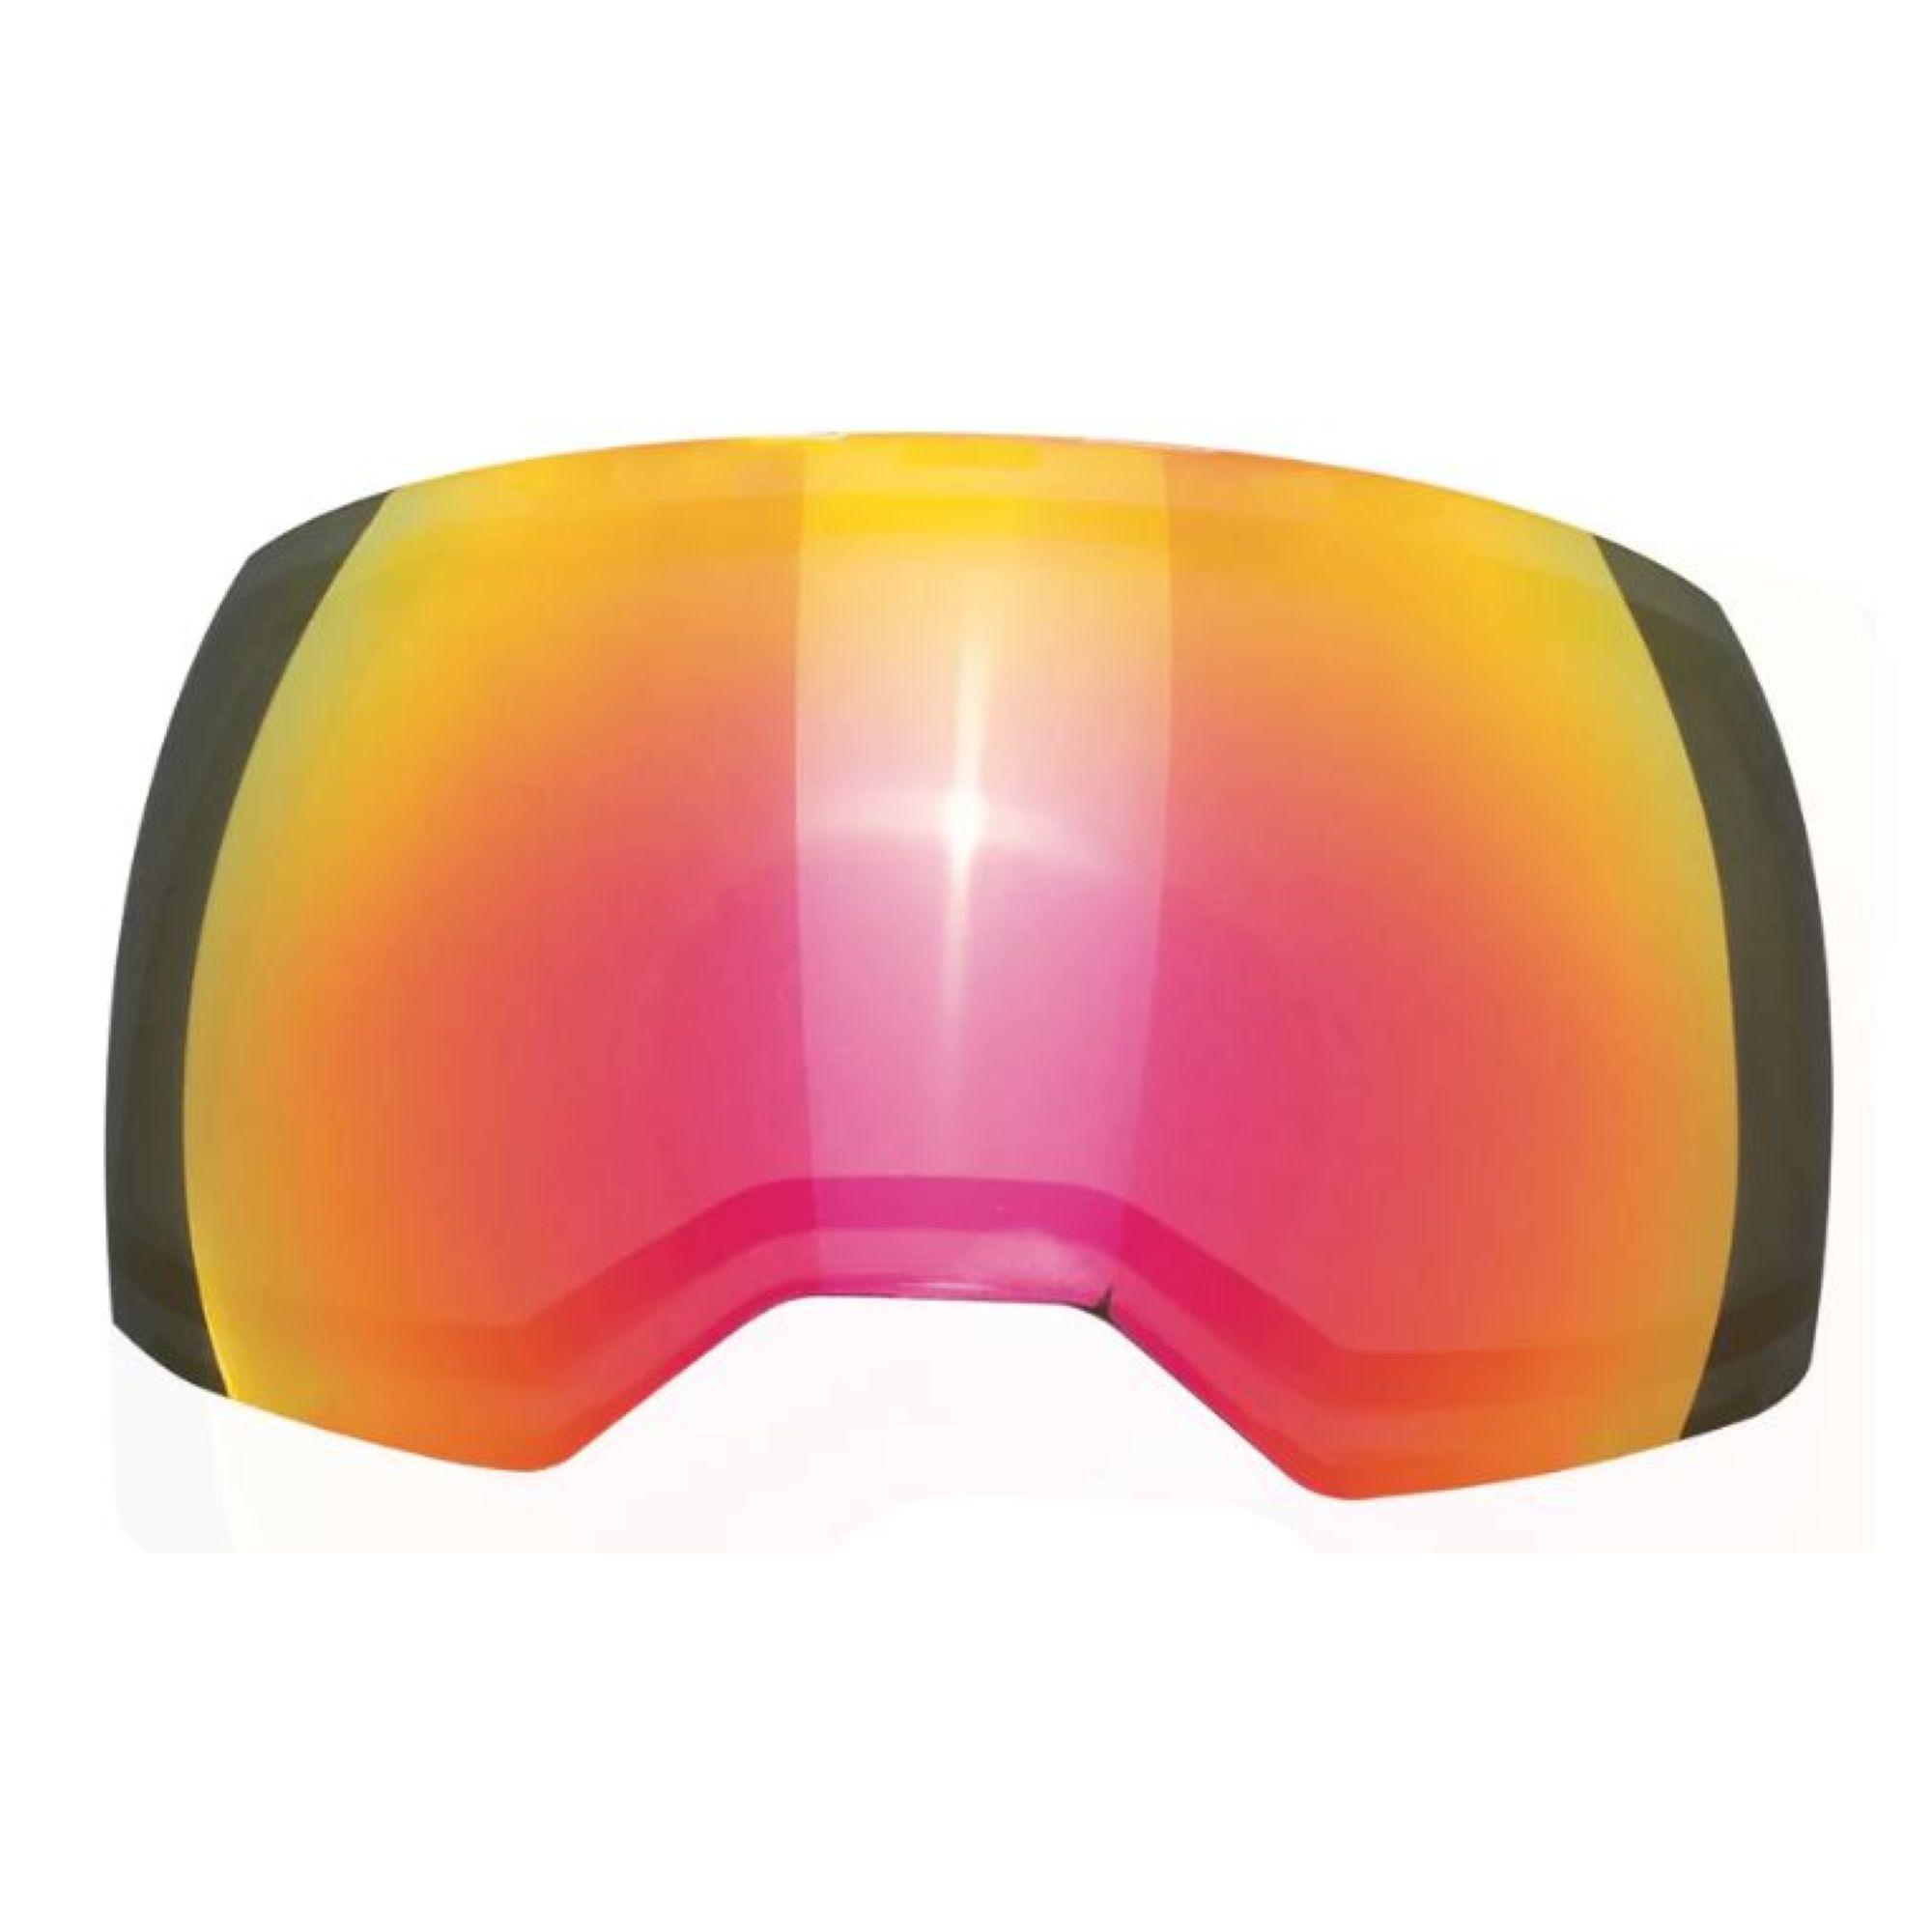 Empire EVS Replacement Thermal Sunset Lens